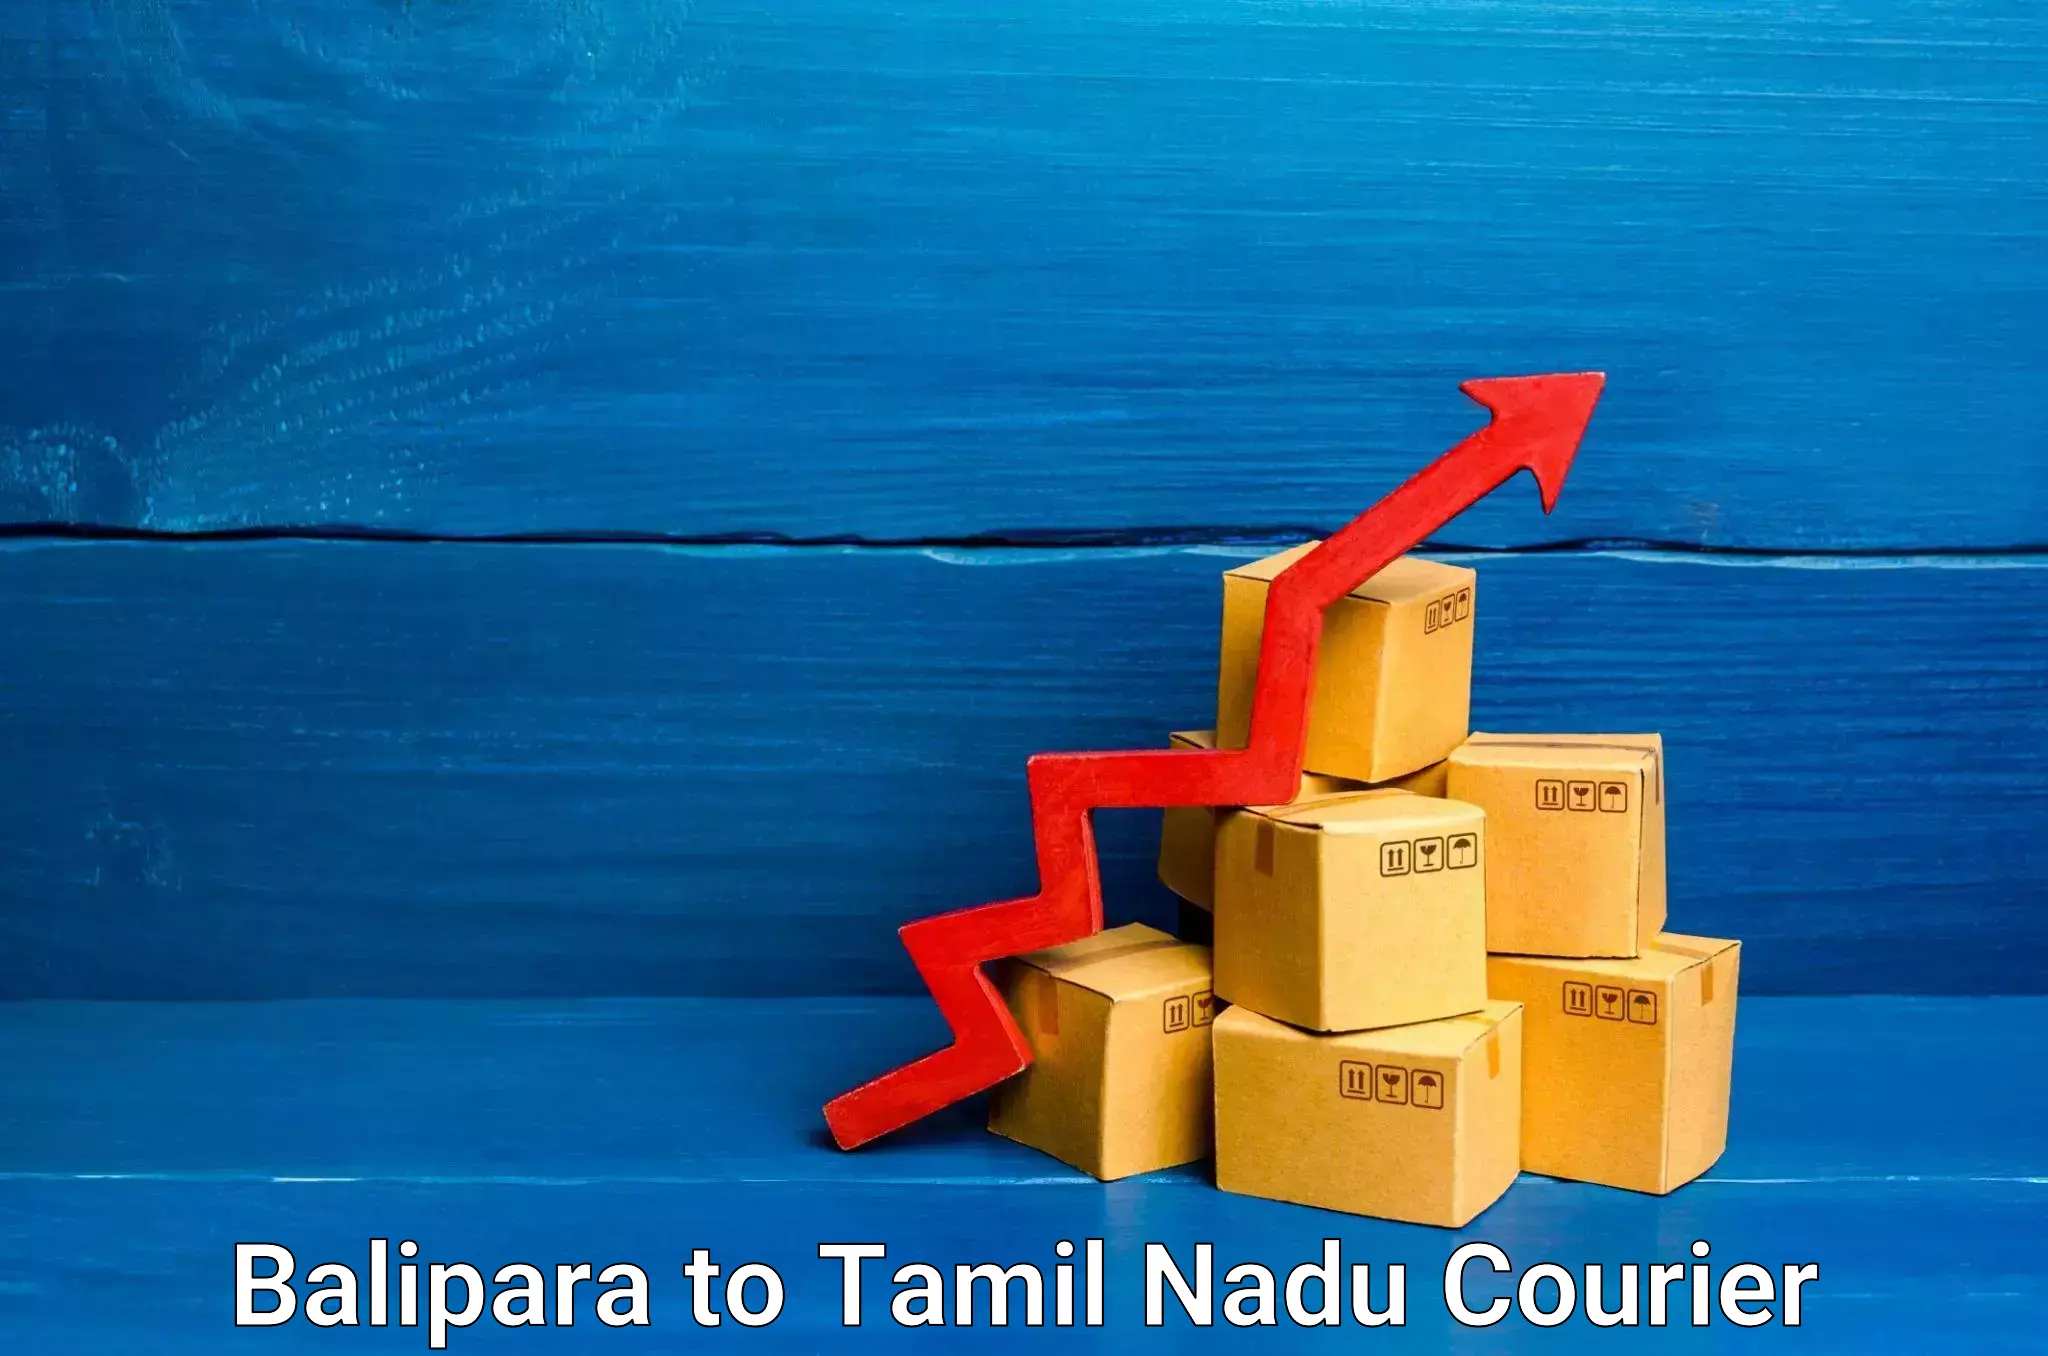 Global shipping networks Balipara to Trichy